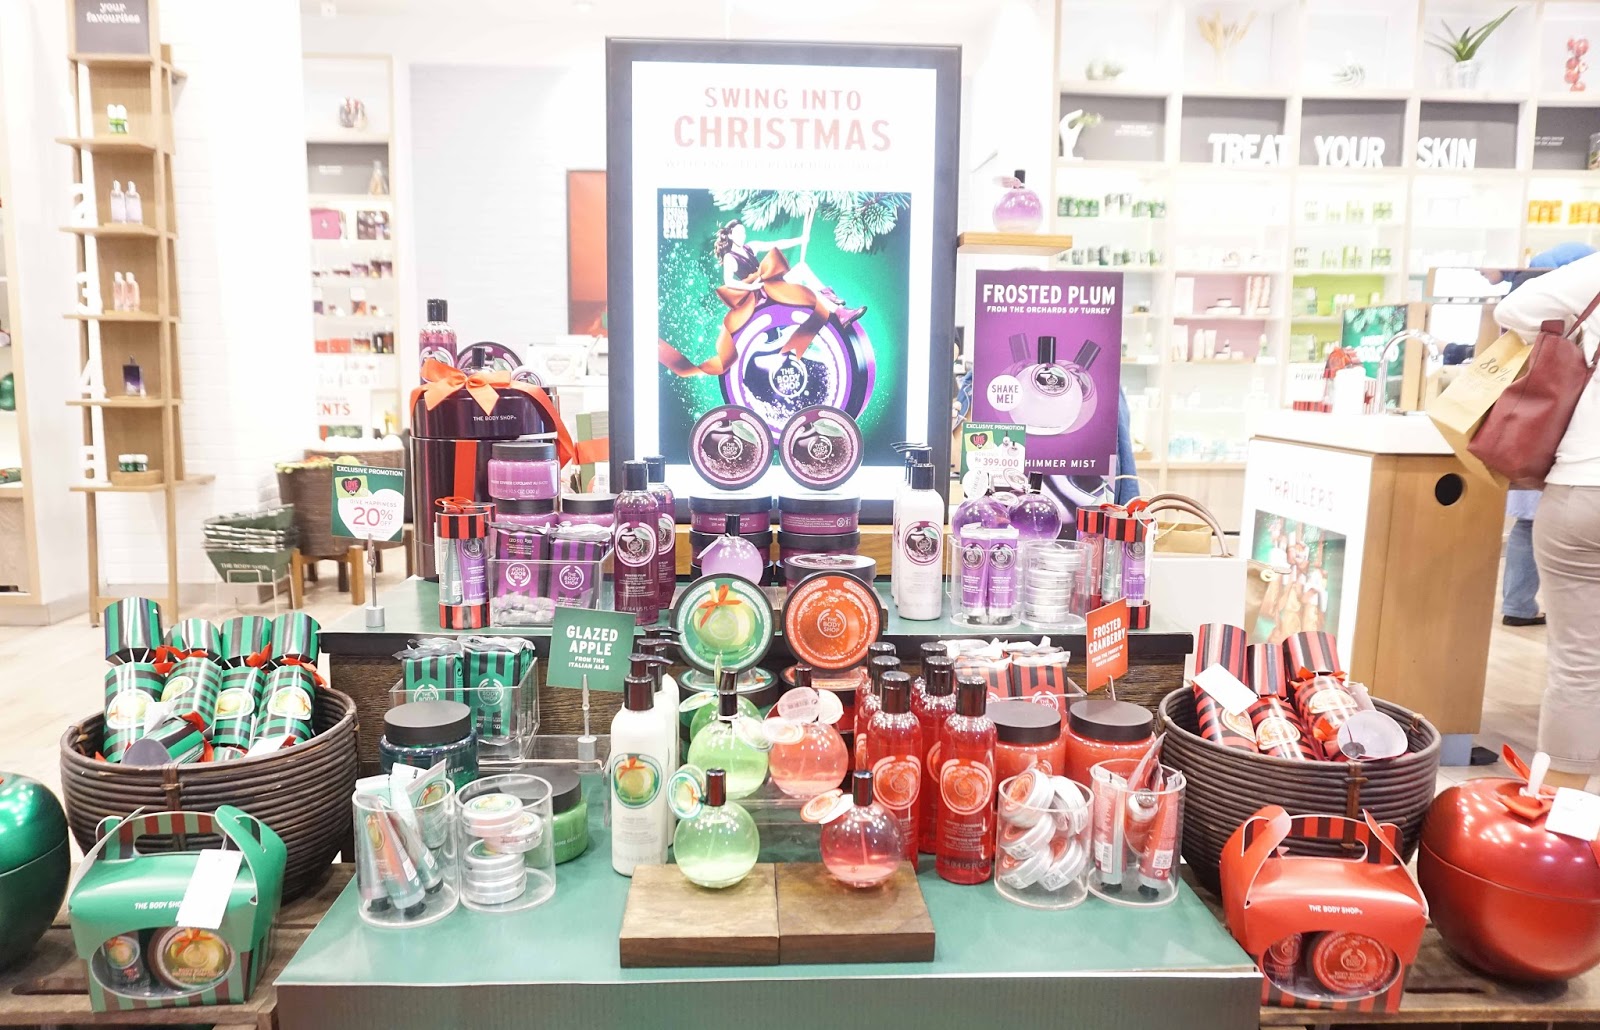 the body shop, body shop, christmas, christmas gift, gift, holiday, gifts. exclusive preview